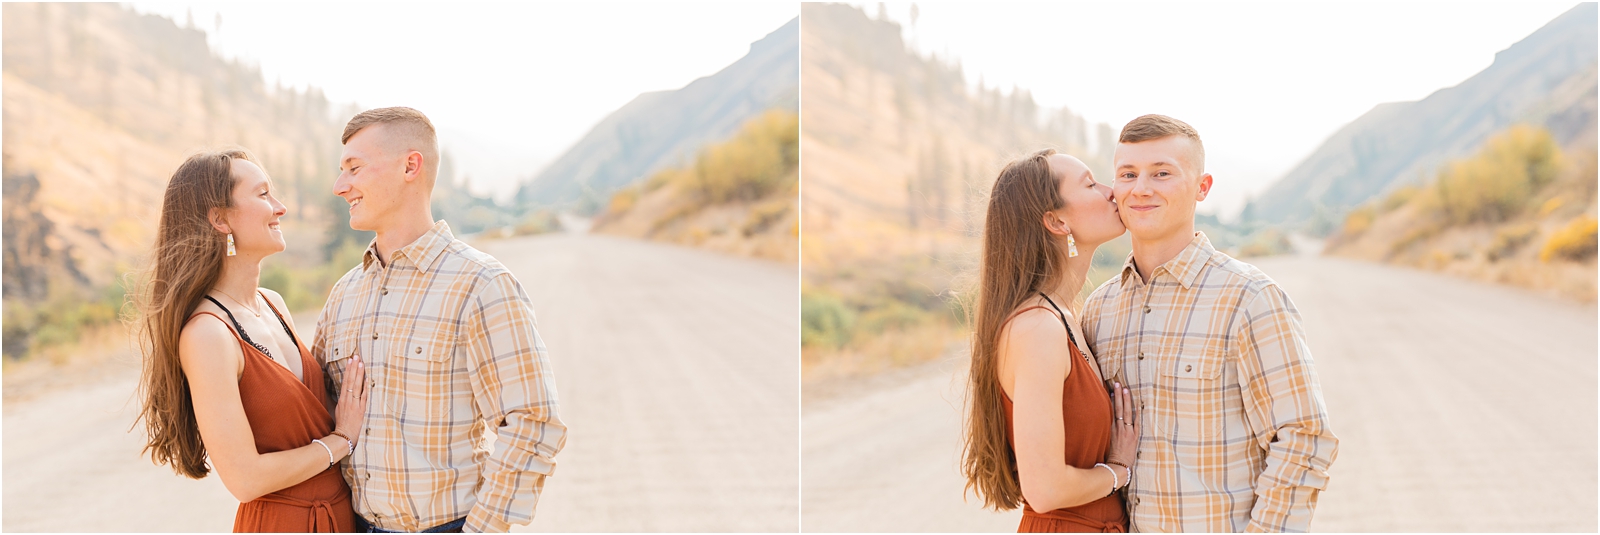 woman kissing her fiance on the cheek with mountains in the background during a Couples' Photo Session. Miranda Renee Photography